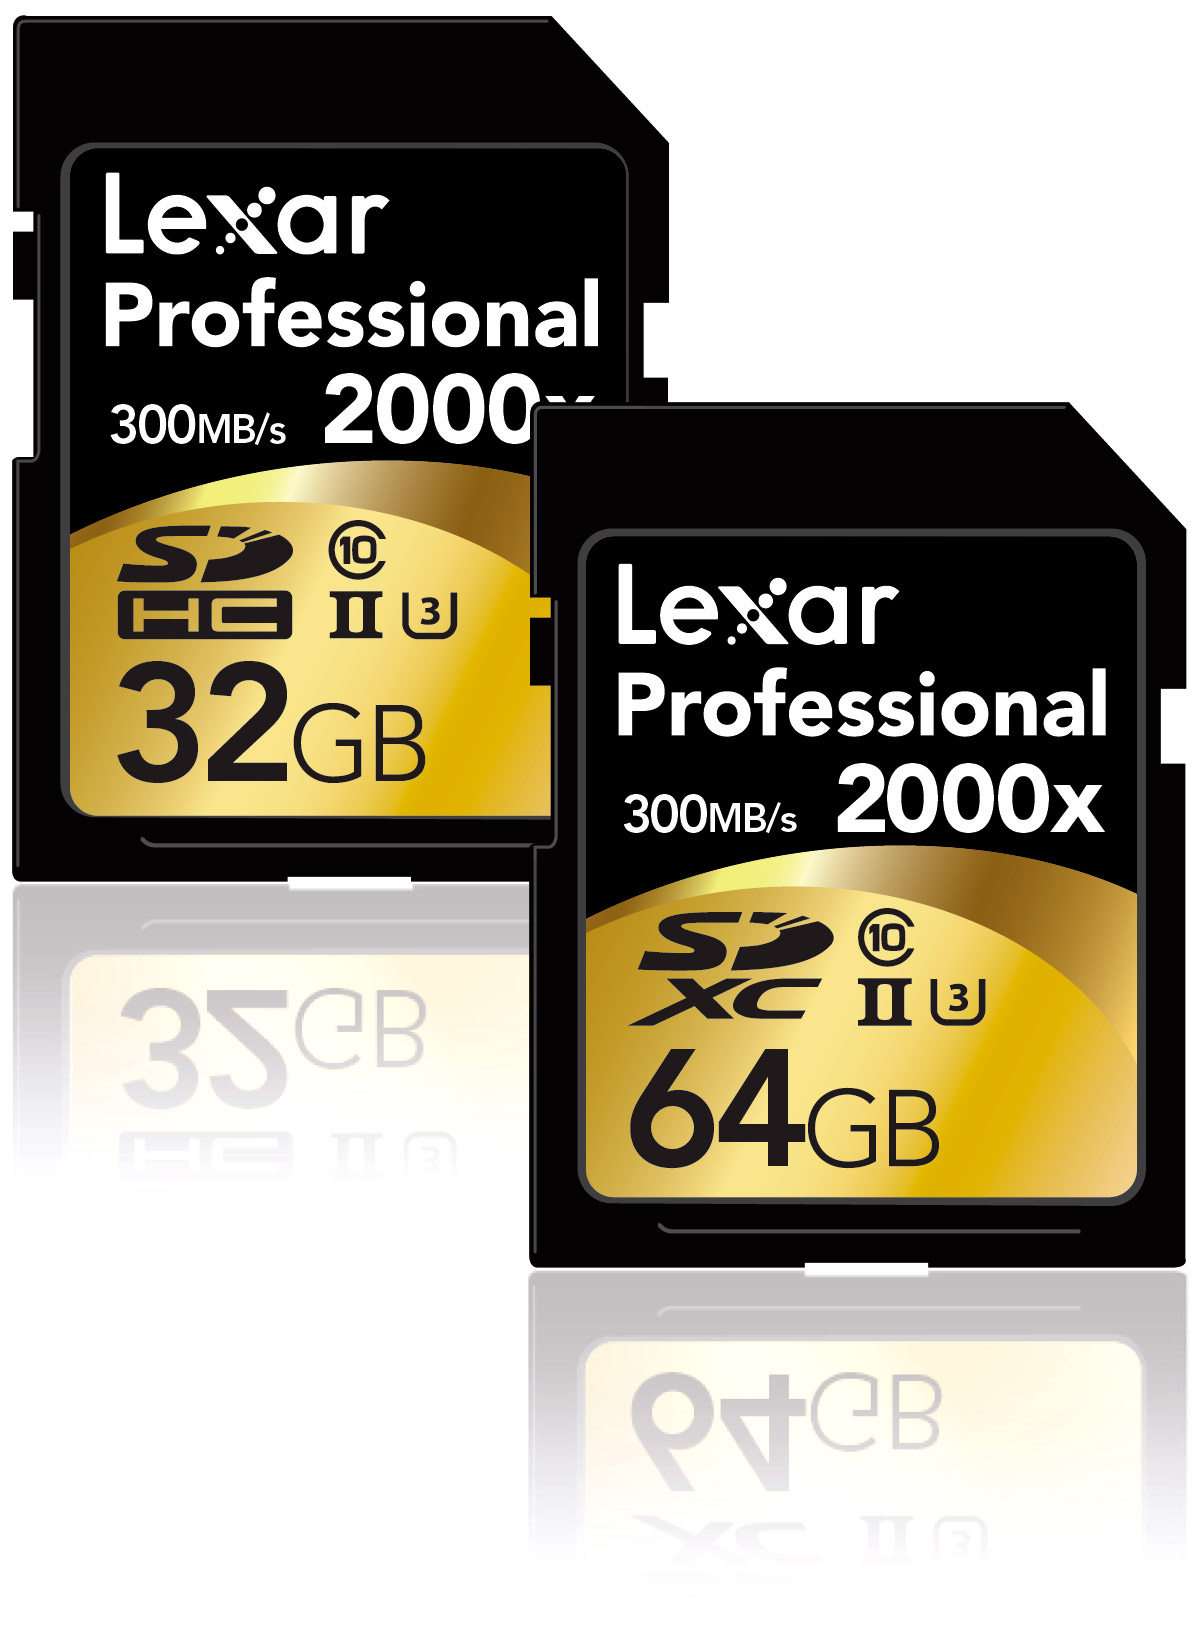 Lexar Introduces 1000x and 2000x UHS-II SD Memory Cards - Camera Memory